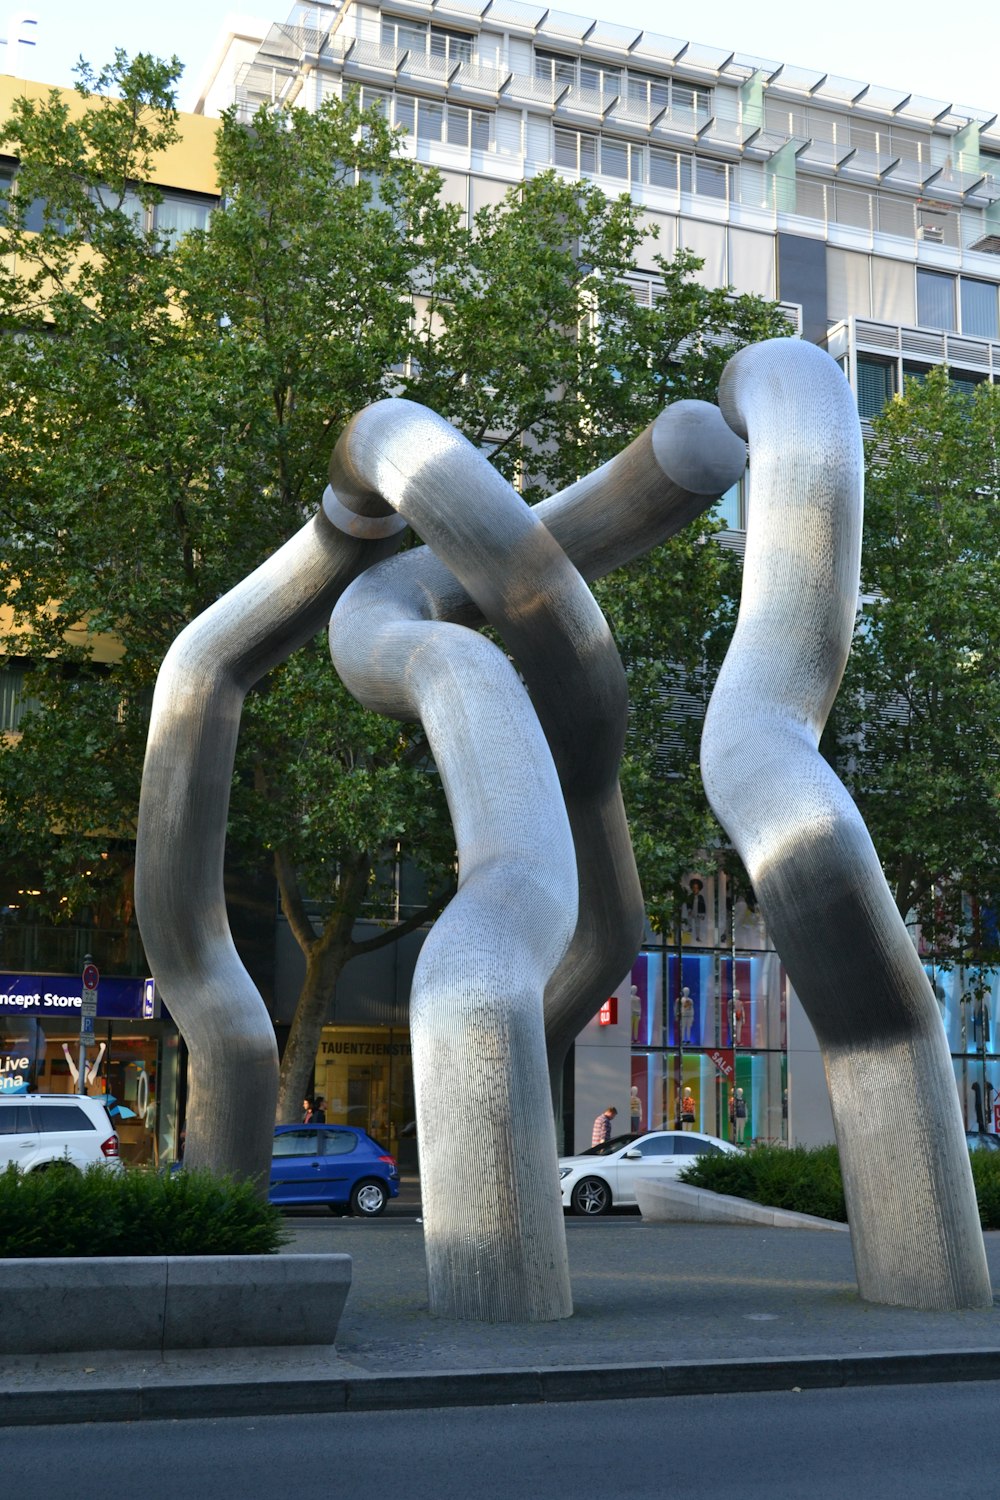 a large metal sculpture in the middle of a street